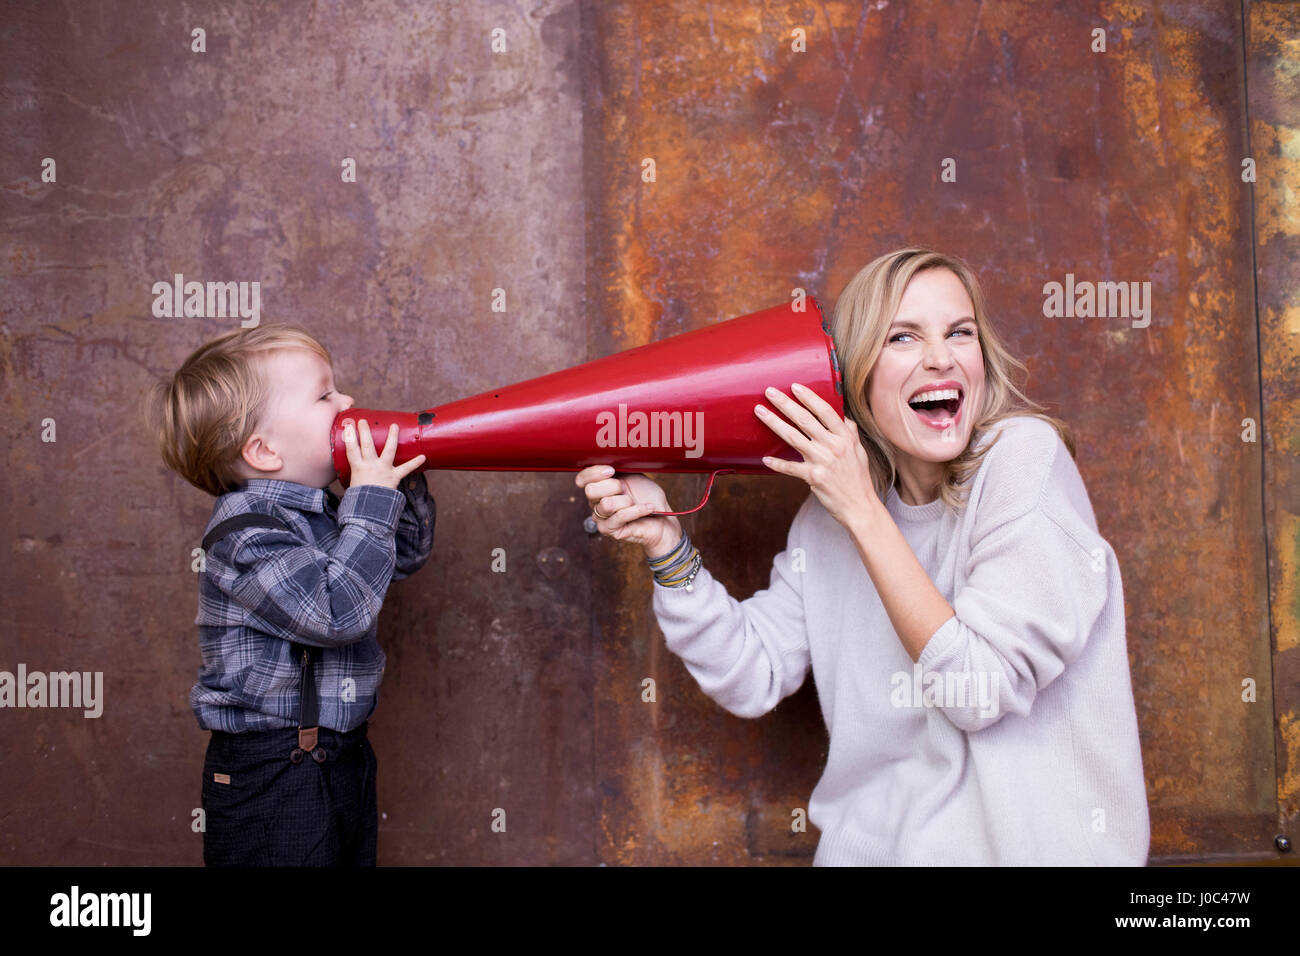 Young boy speaking into megaphone, woman holding megaphone to her ear Stock Photo